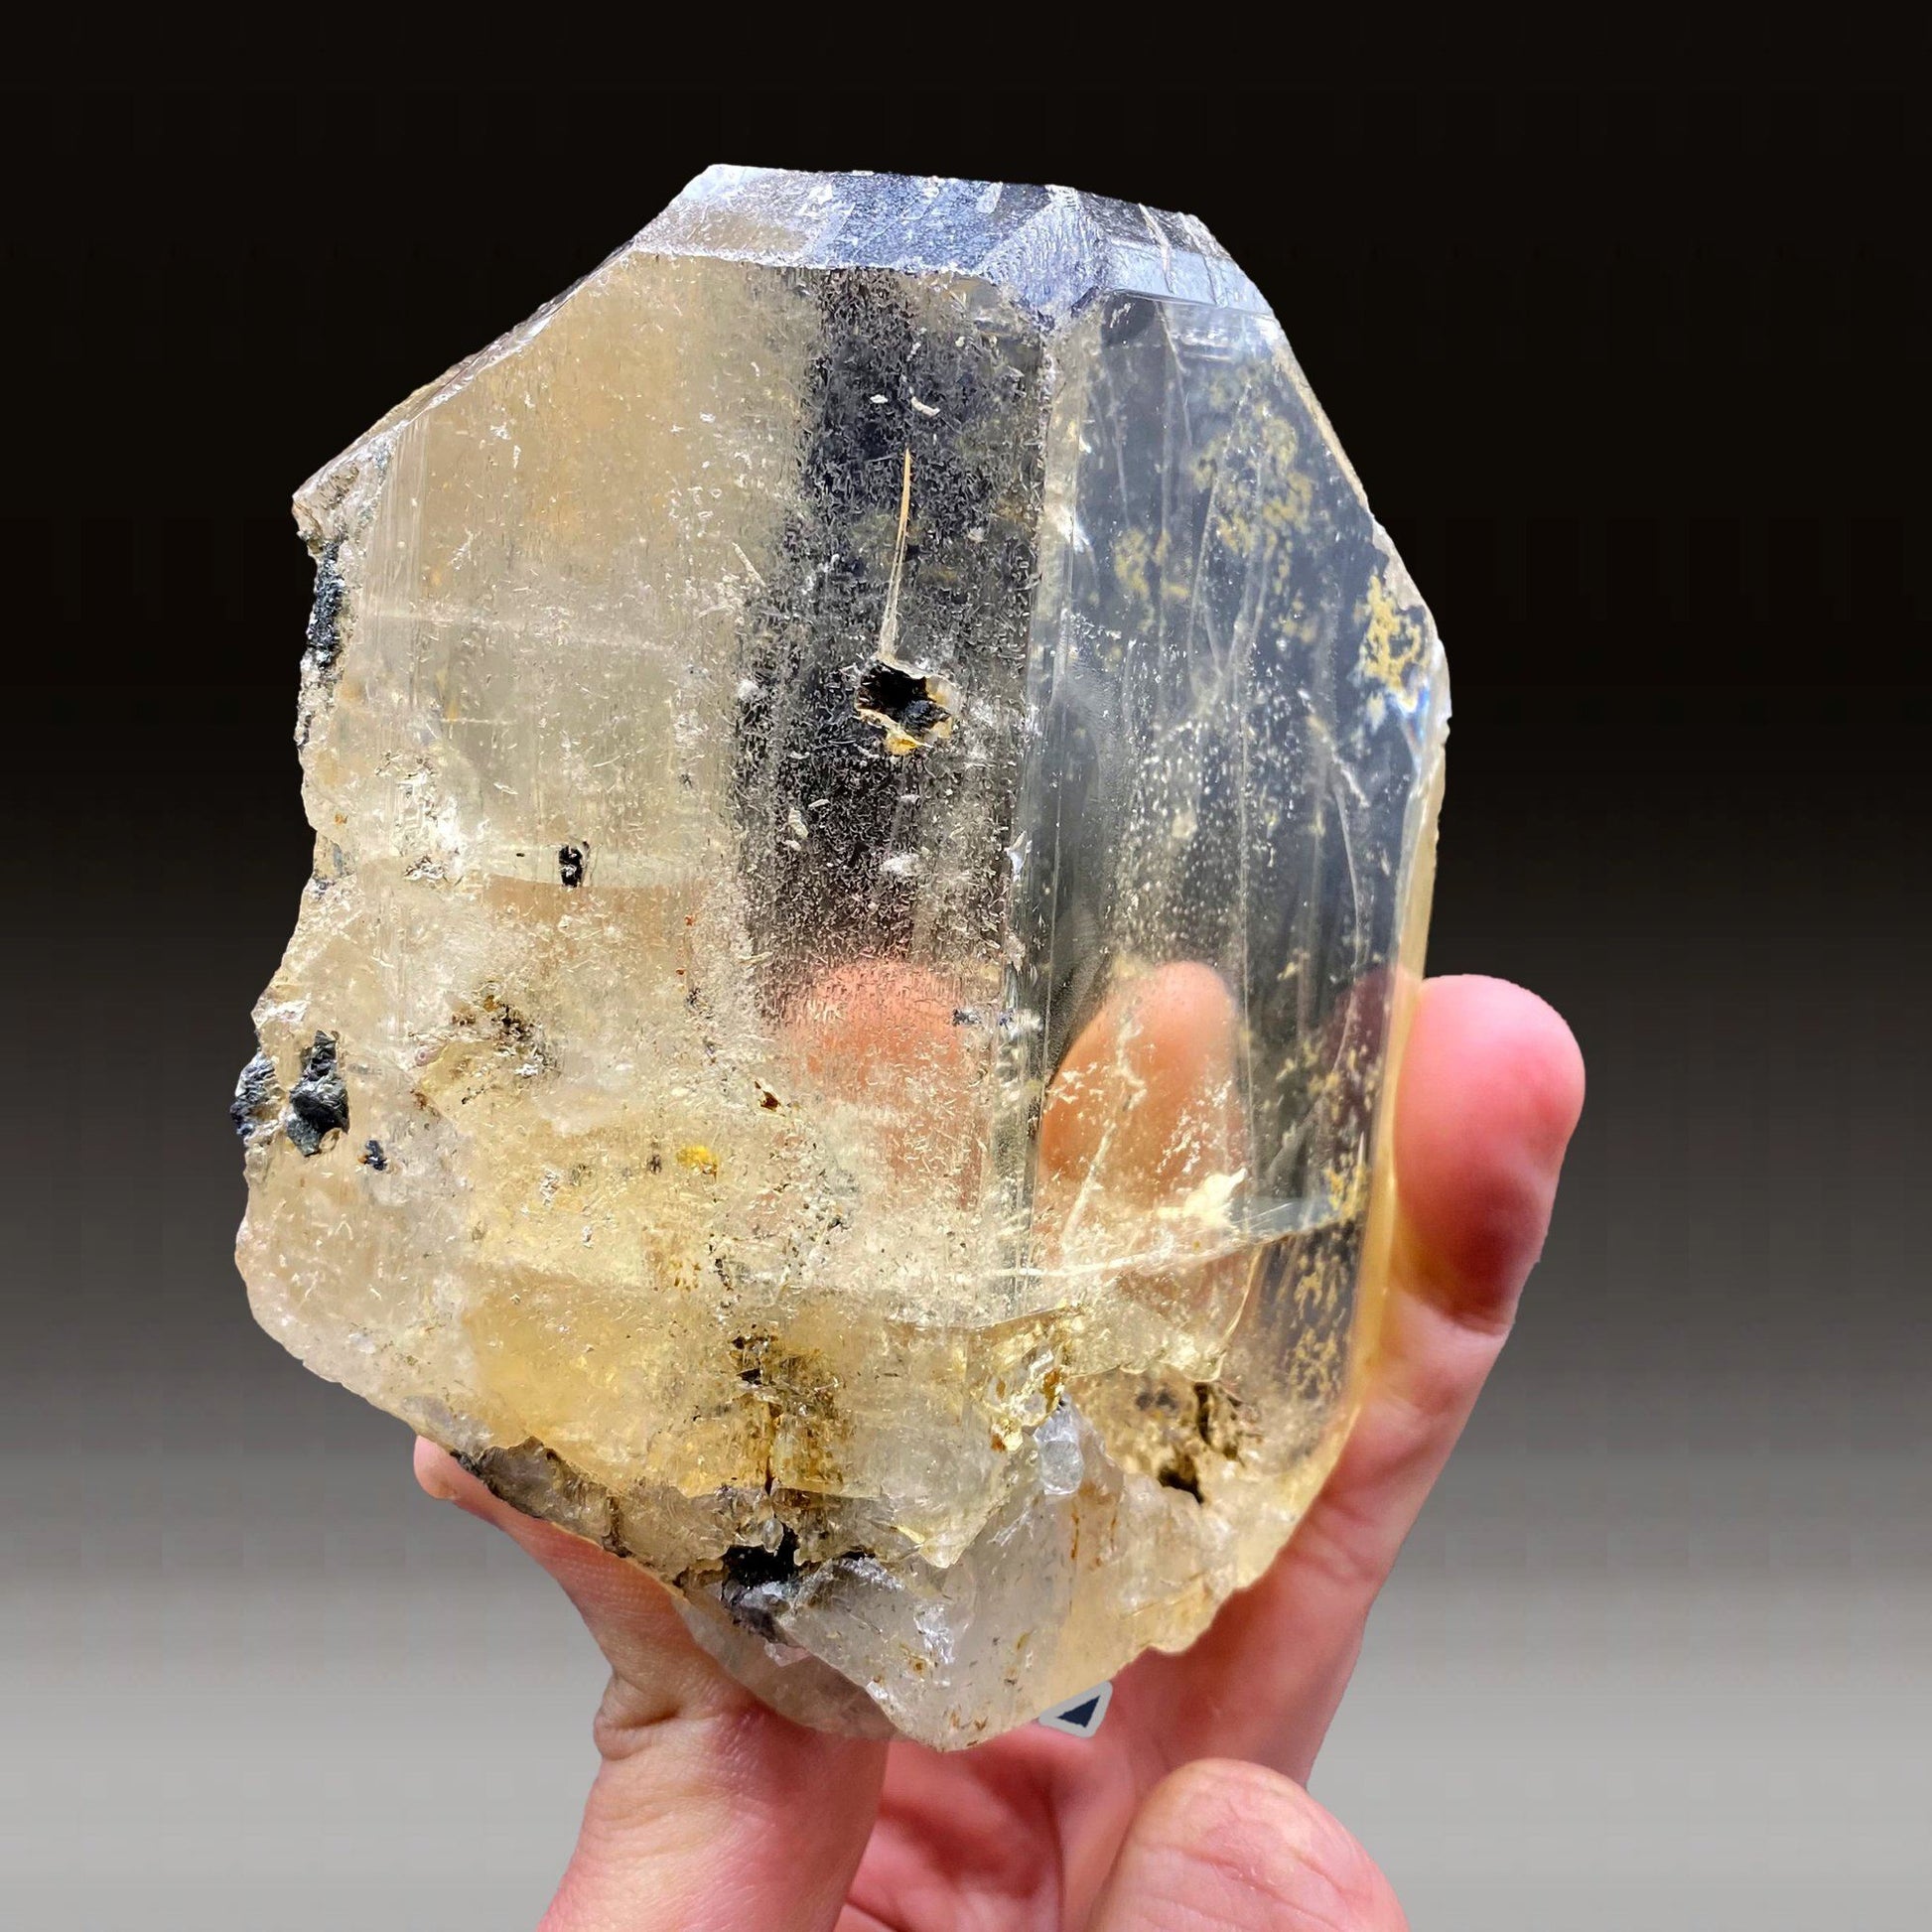 Imperial Topaz # Q7  https://www.superbminerals.us/products/imperial-topaz-q7  Features:Superb 9 Cm crystal of Topaz from this less common locality - Southern India. Imperial Topaz with rich color, clear and gem. It has vivid sherry-orange color. The crystal is strongly lustrous and glassy. It is perfectly terminated with like faceted faces. In superb condition. Splendid gem!